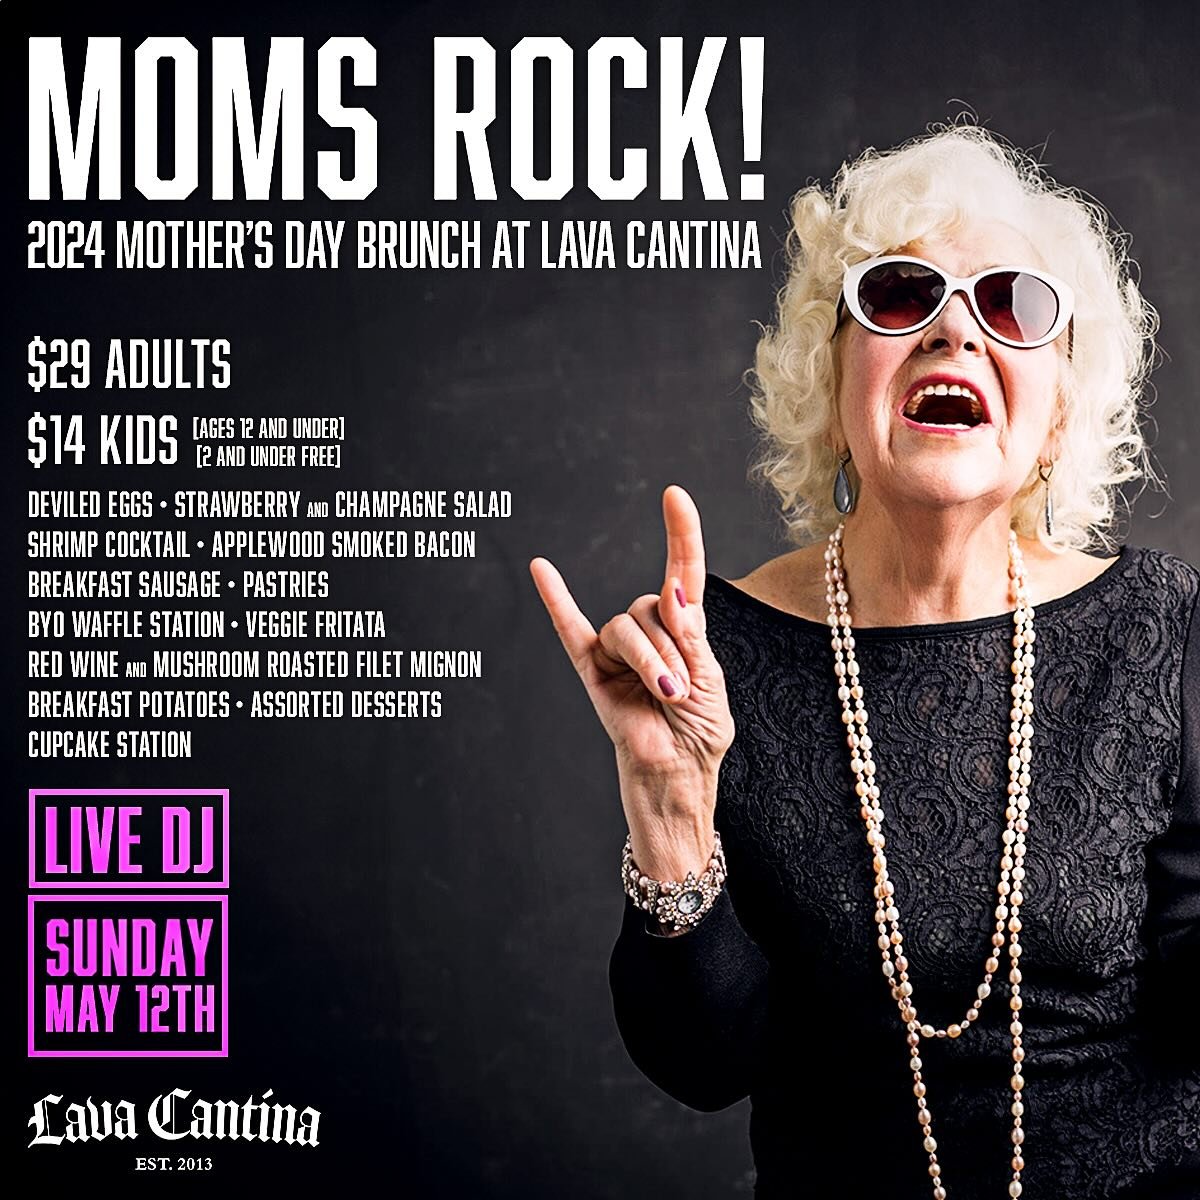 🚨 SUNDAY, MAY 12TH @lavacantinatc 🚨

MOMS ROCK! Mother&rsquo;s Day Brunch 
Buffet | Live DJ 
10 AM - 2 PM
RESERVATION TIX BELOW
(Brunch paid upon arrival at venue)
🎟️🎟️➡️ https://tinyurl.com/bdeheszy

💥💥💥💥💥

NEO SOUL SUNDAYS with ROXIE MUSIQ